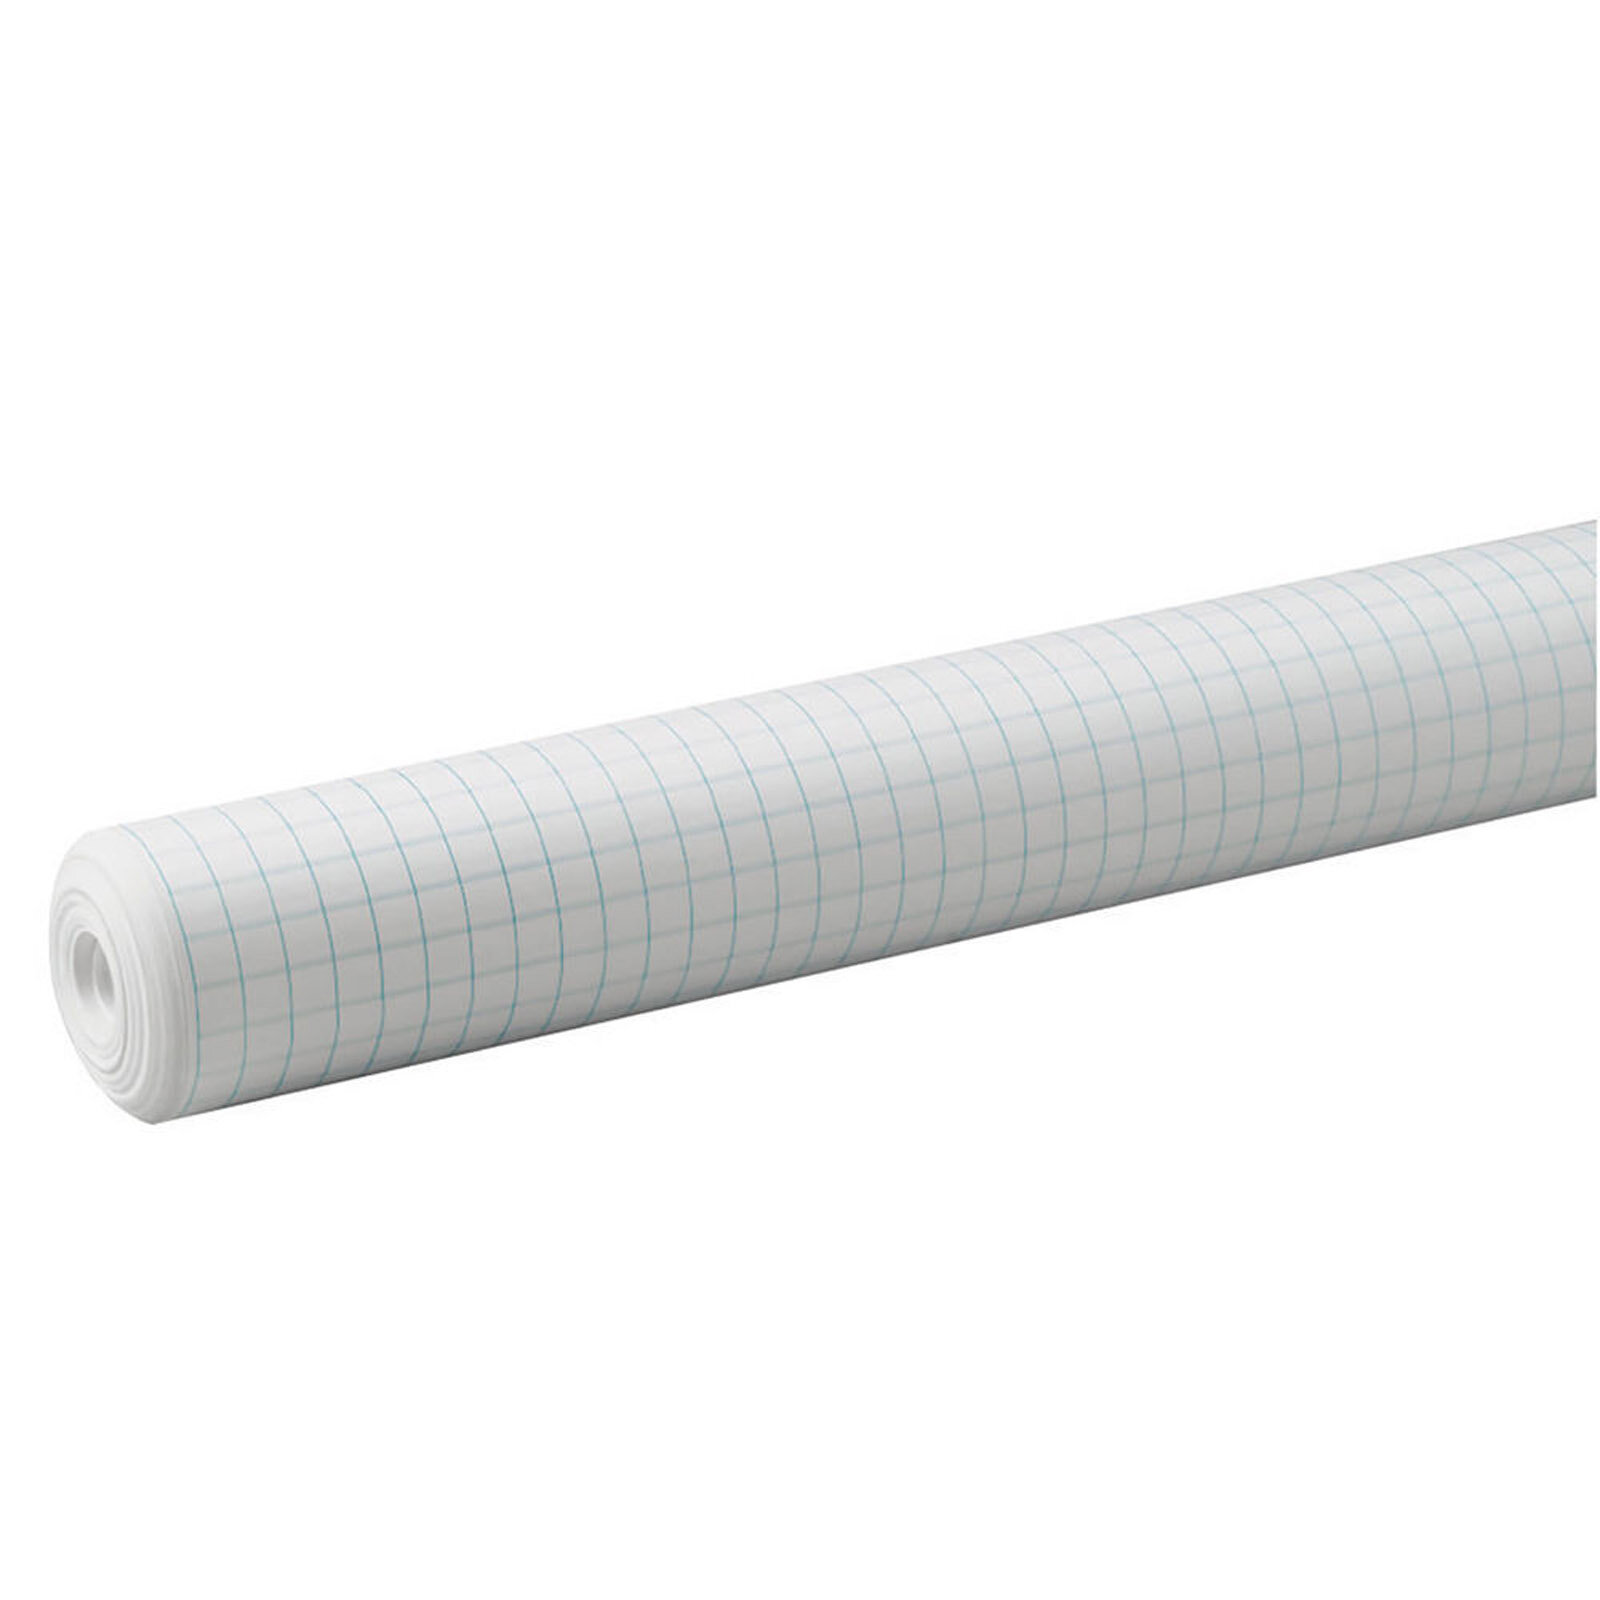 Pacon Easel Roll Drawing Paper, 18 x 200